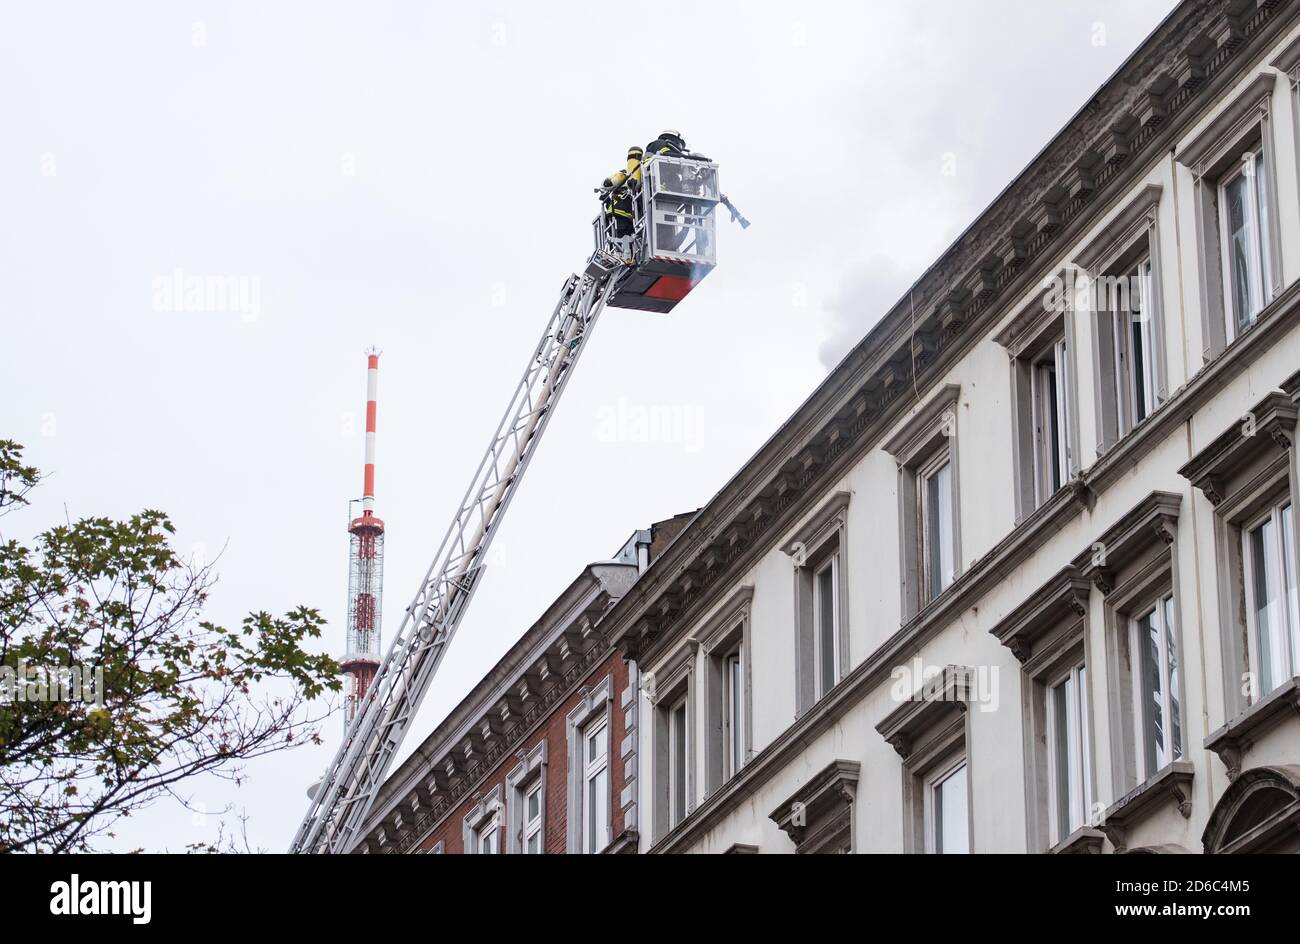 Hamburg, Germany. 16th Oct, 2020. A turntable ladder is in use in the Karolinenviertel in a roof truss fire. More than 100 firefighters have been extinguishing the fire in the narrow street since the morning hours. The inhabitants of the house were not injured in the fire. (to dpa 'Large fire brigade operation in roof truss fire in Karoviertel') Credit: Daniel Bockwoldt/dpa/Alamy Live News Stock Photo